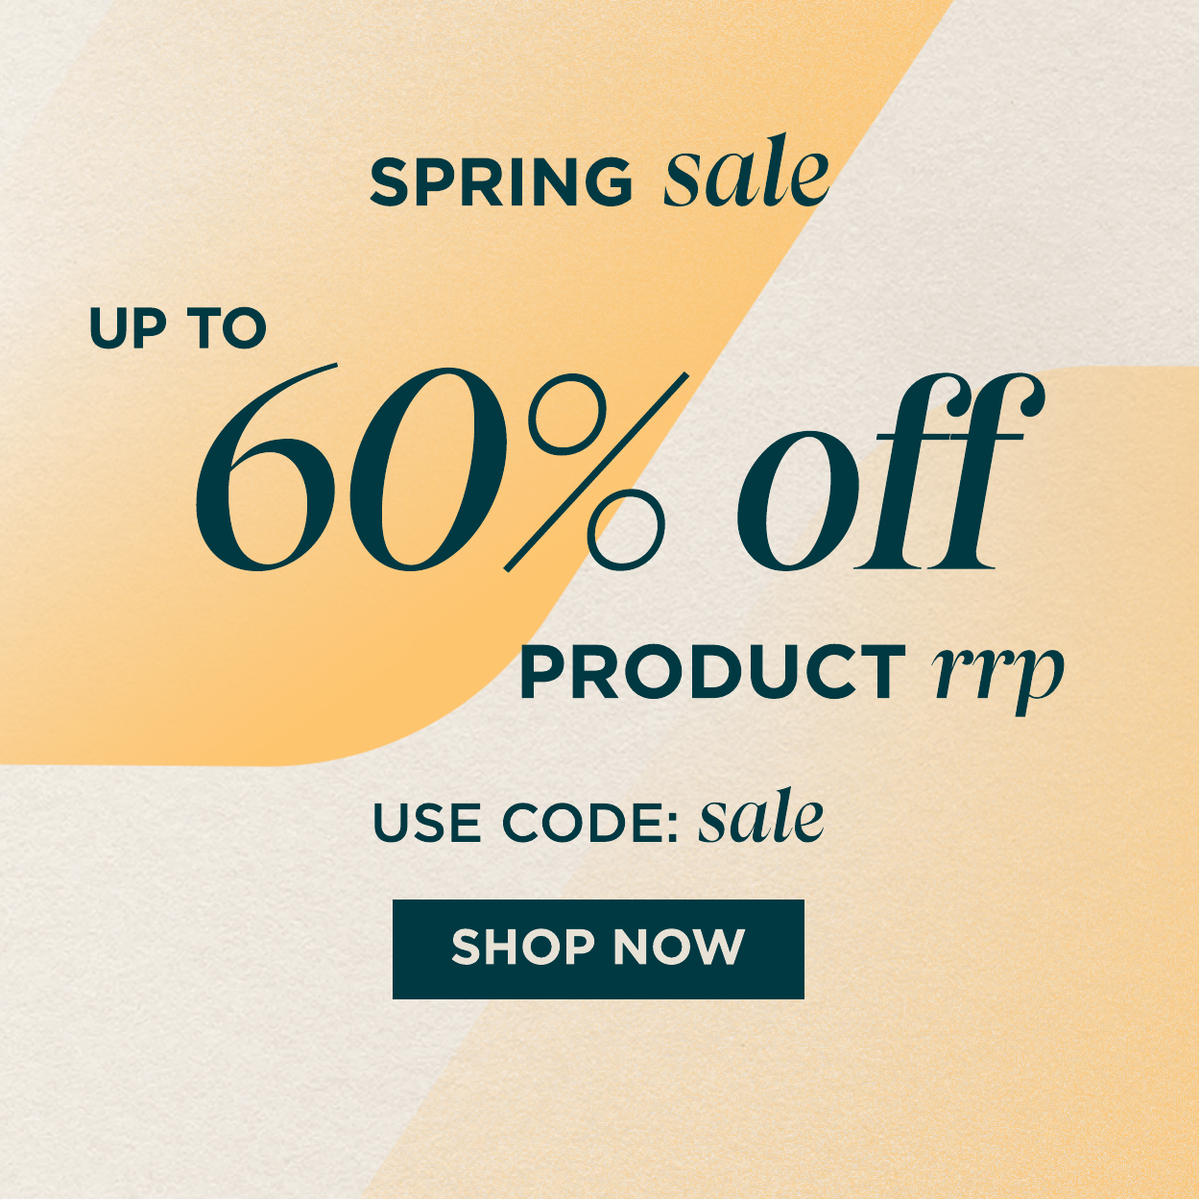 Up to 60% off Spring Sale use code SALE